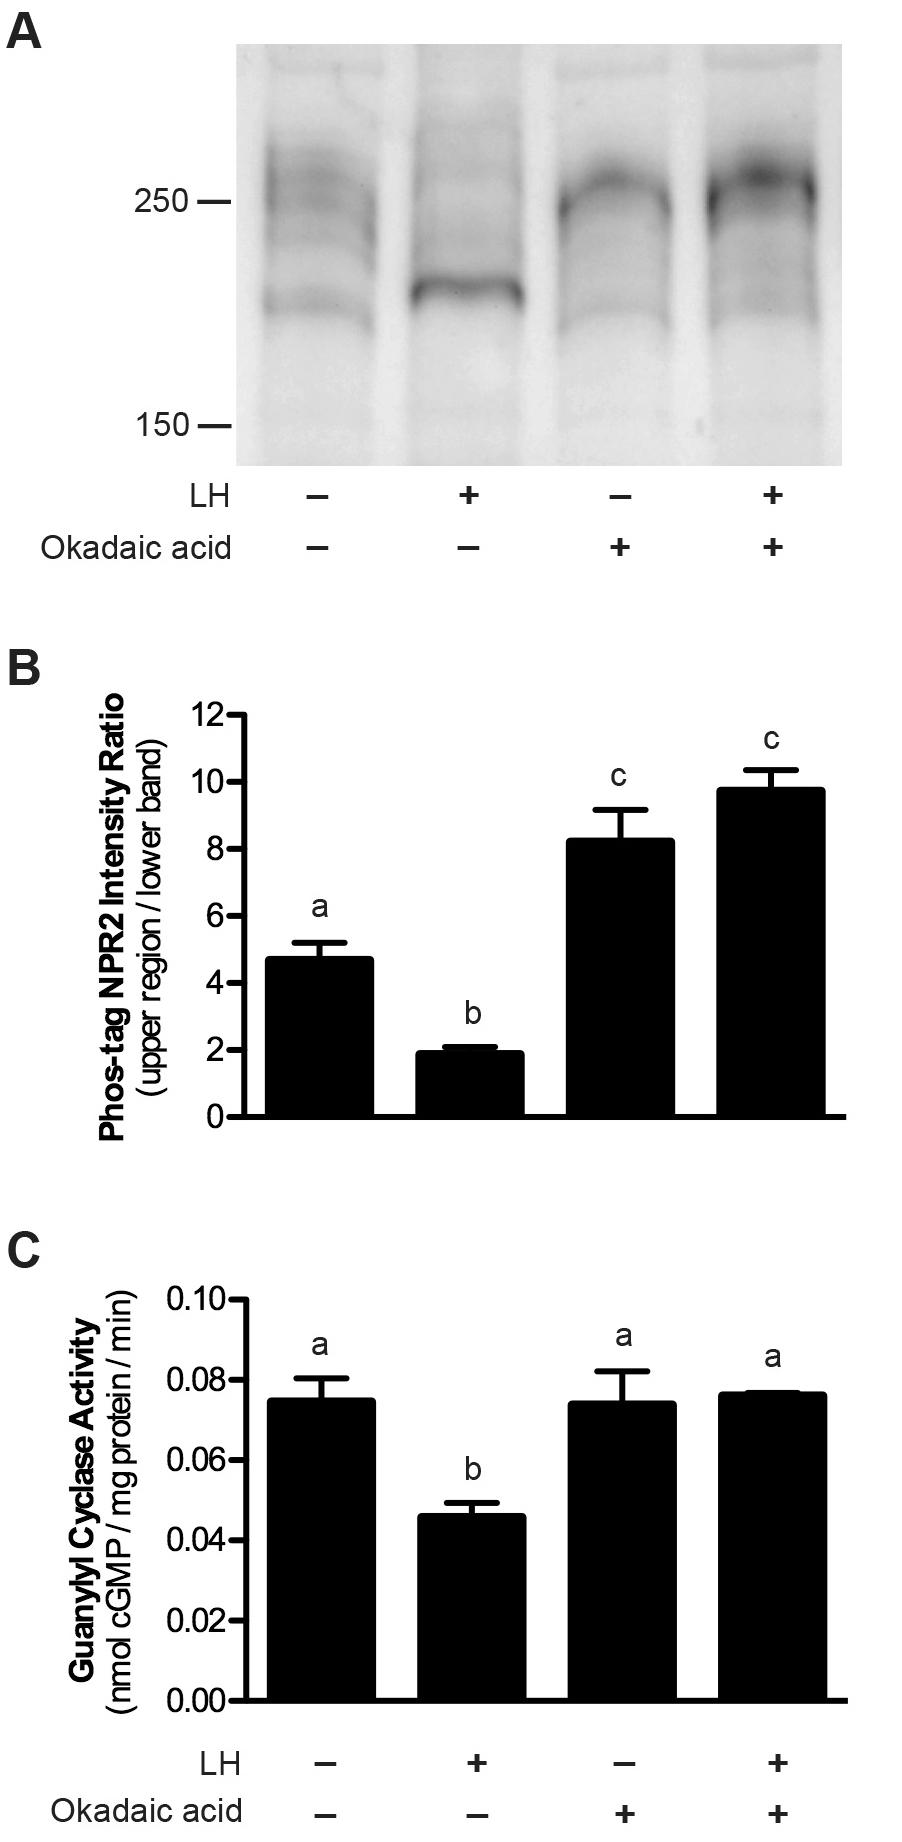 Figure S2. Inhibition of the LH-induced dephosphorylation and inactivation of NPR2 by treatment of follicles with the PPP family phosphatase inhibitor okadaic acid.